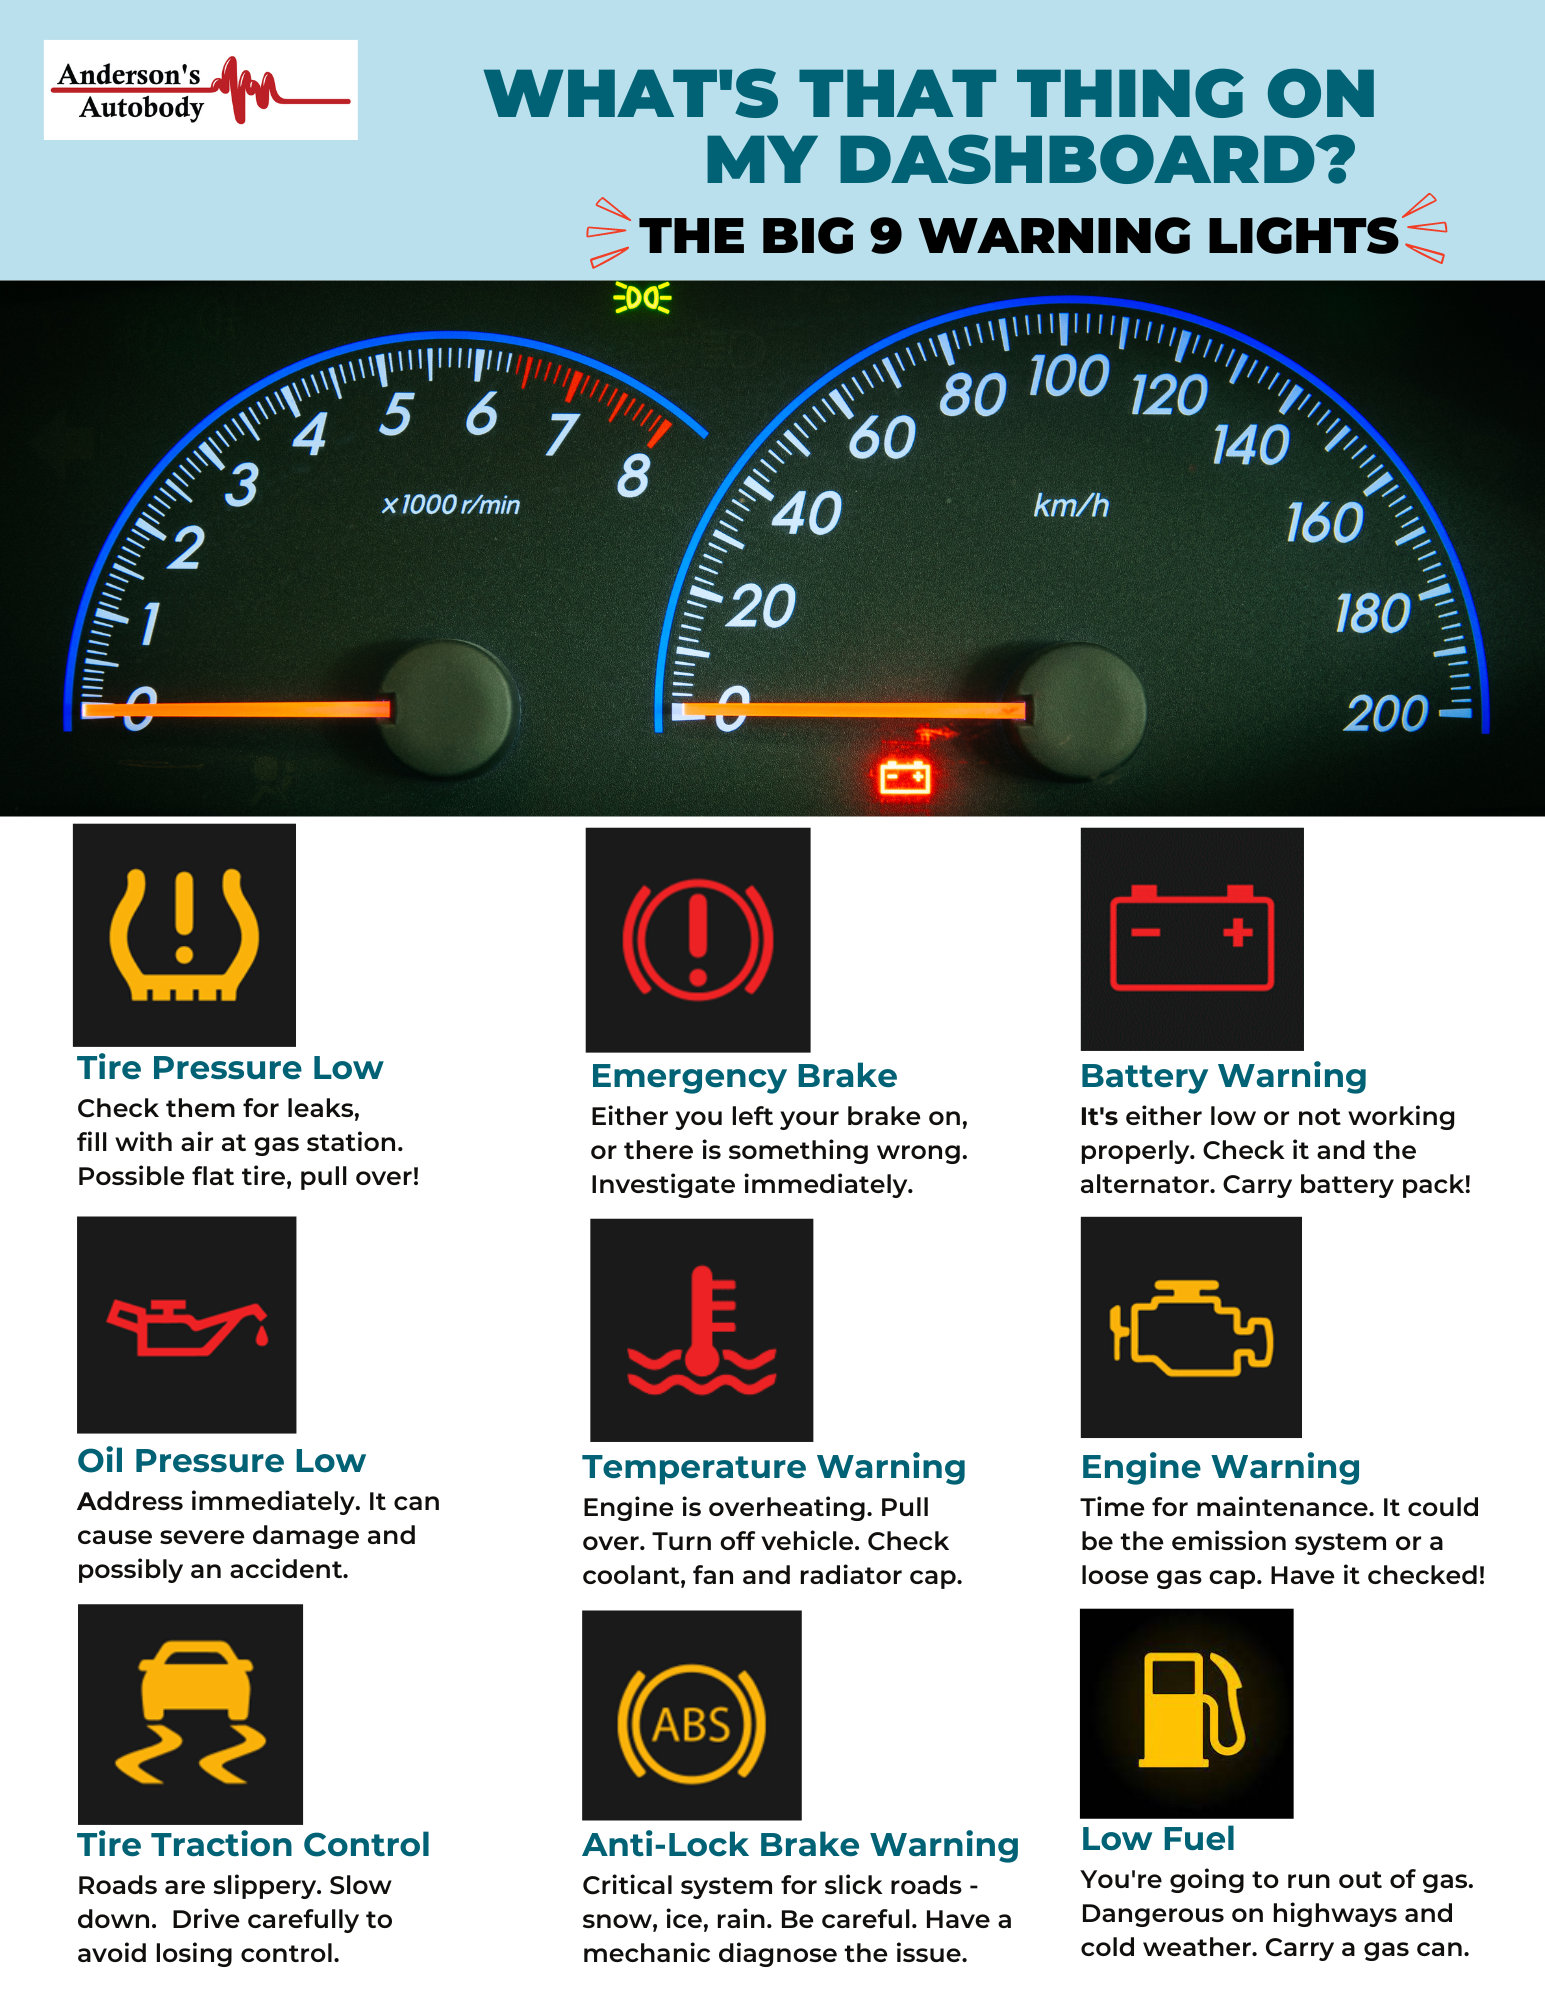 Computer Dashboard Warning Lights In Your Car and What They Mean - Prevent a Crash and Costly Damage